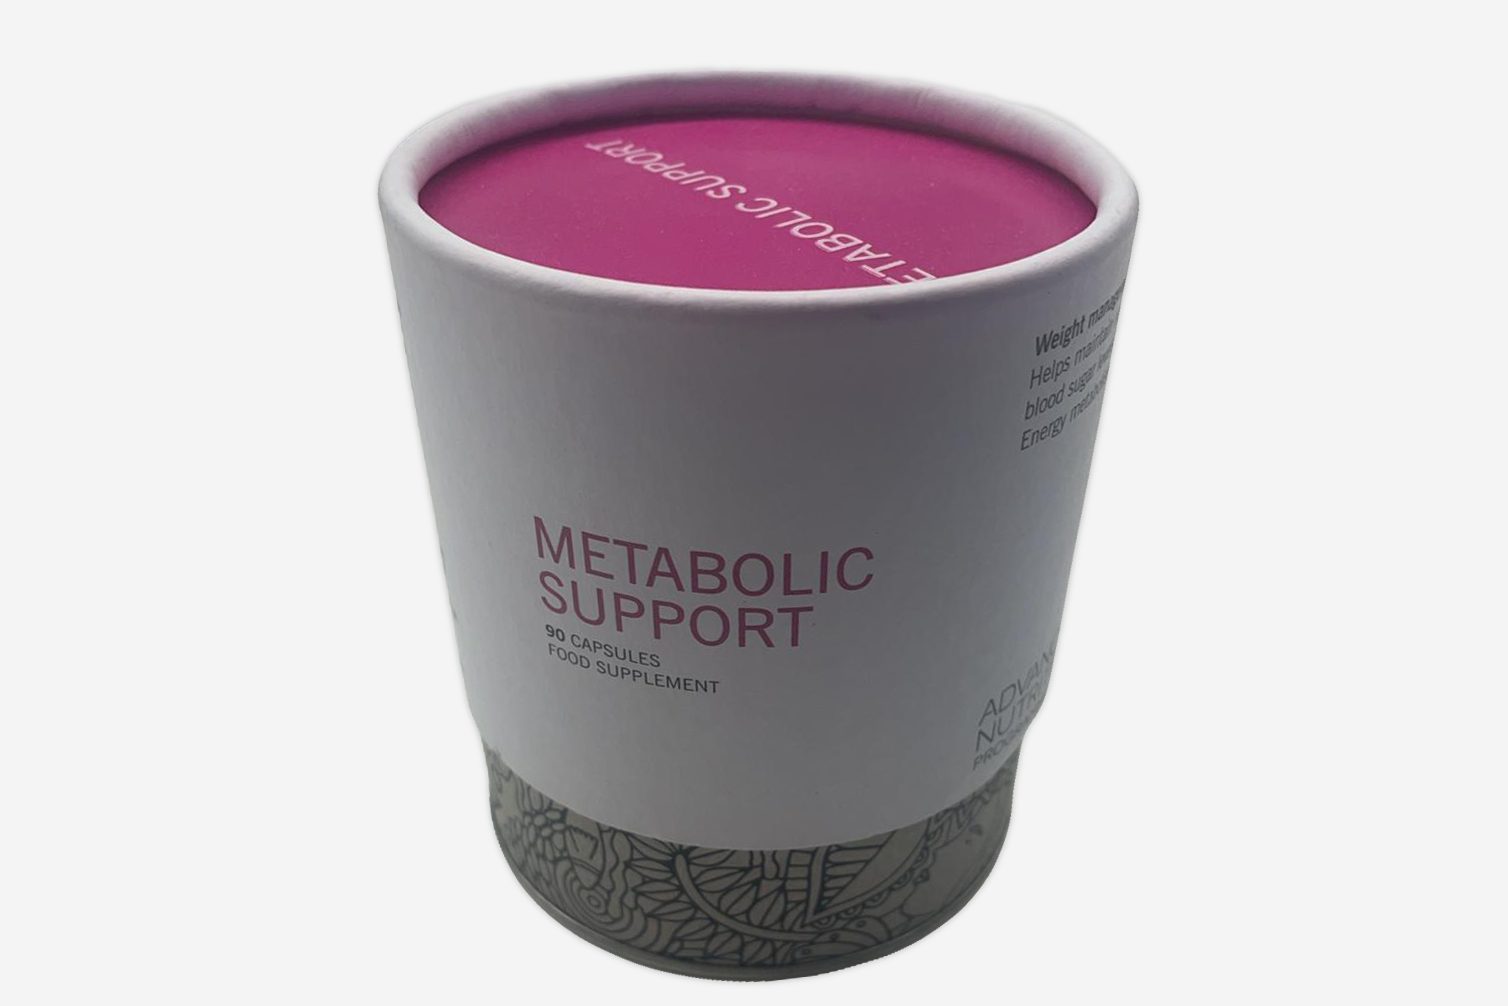 Metabolic support